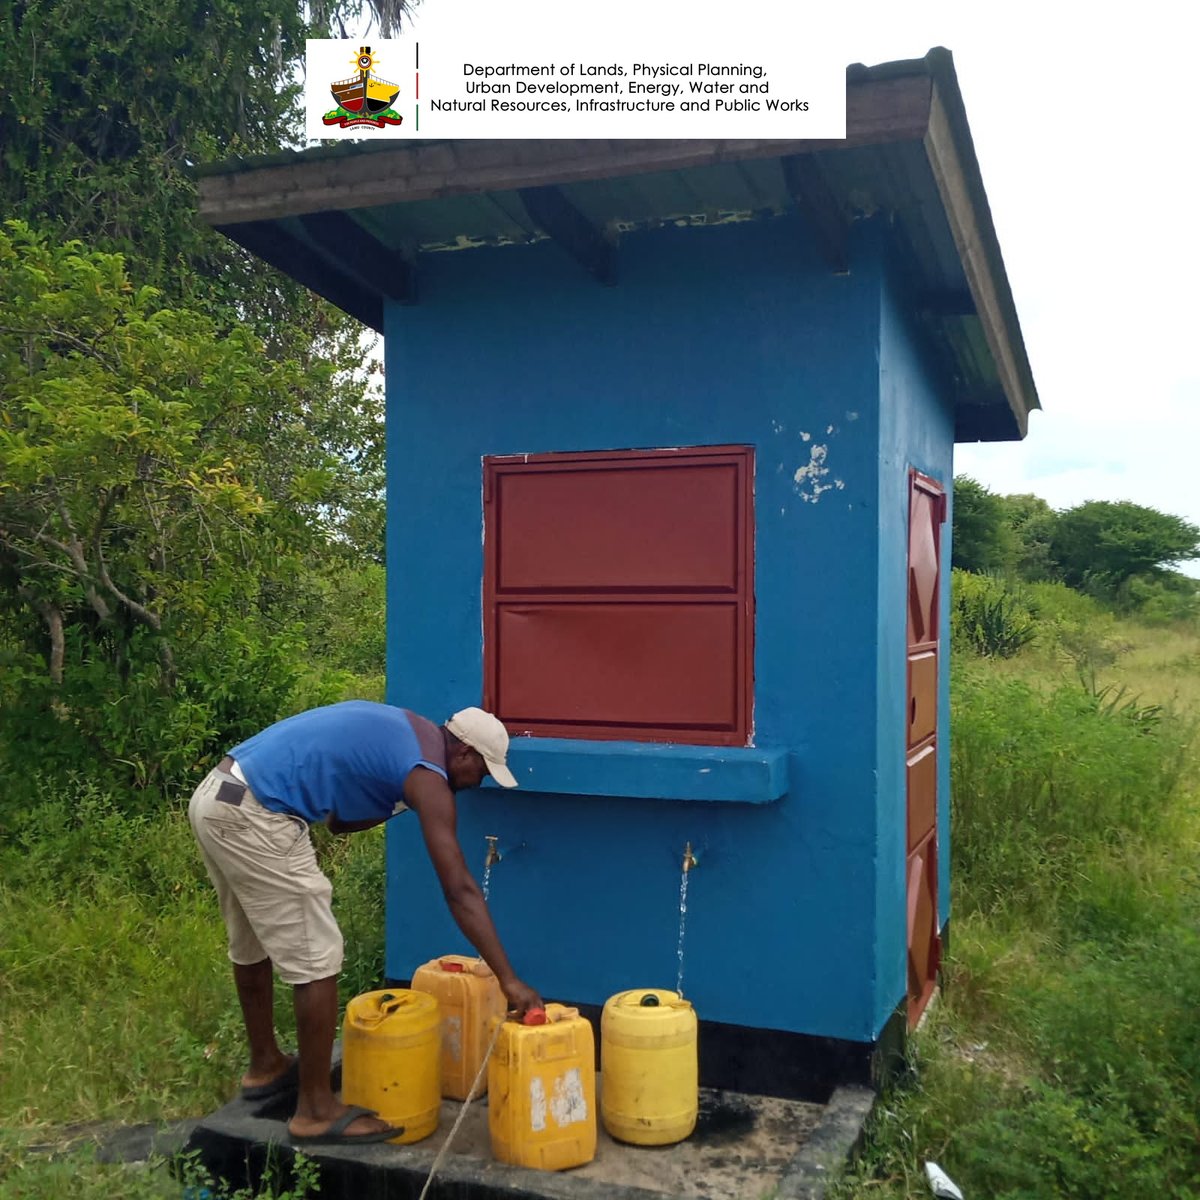 The Wiwa water Distribution System Enhancement Project, led by His Excellency the Governor in collaboration with the Kitumbini community, has successfully revitalized Kitumbini's water infrastructure. With 20 new kiosks, revamped maintenance practices. #WaterInfrastructure